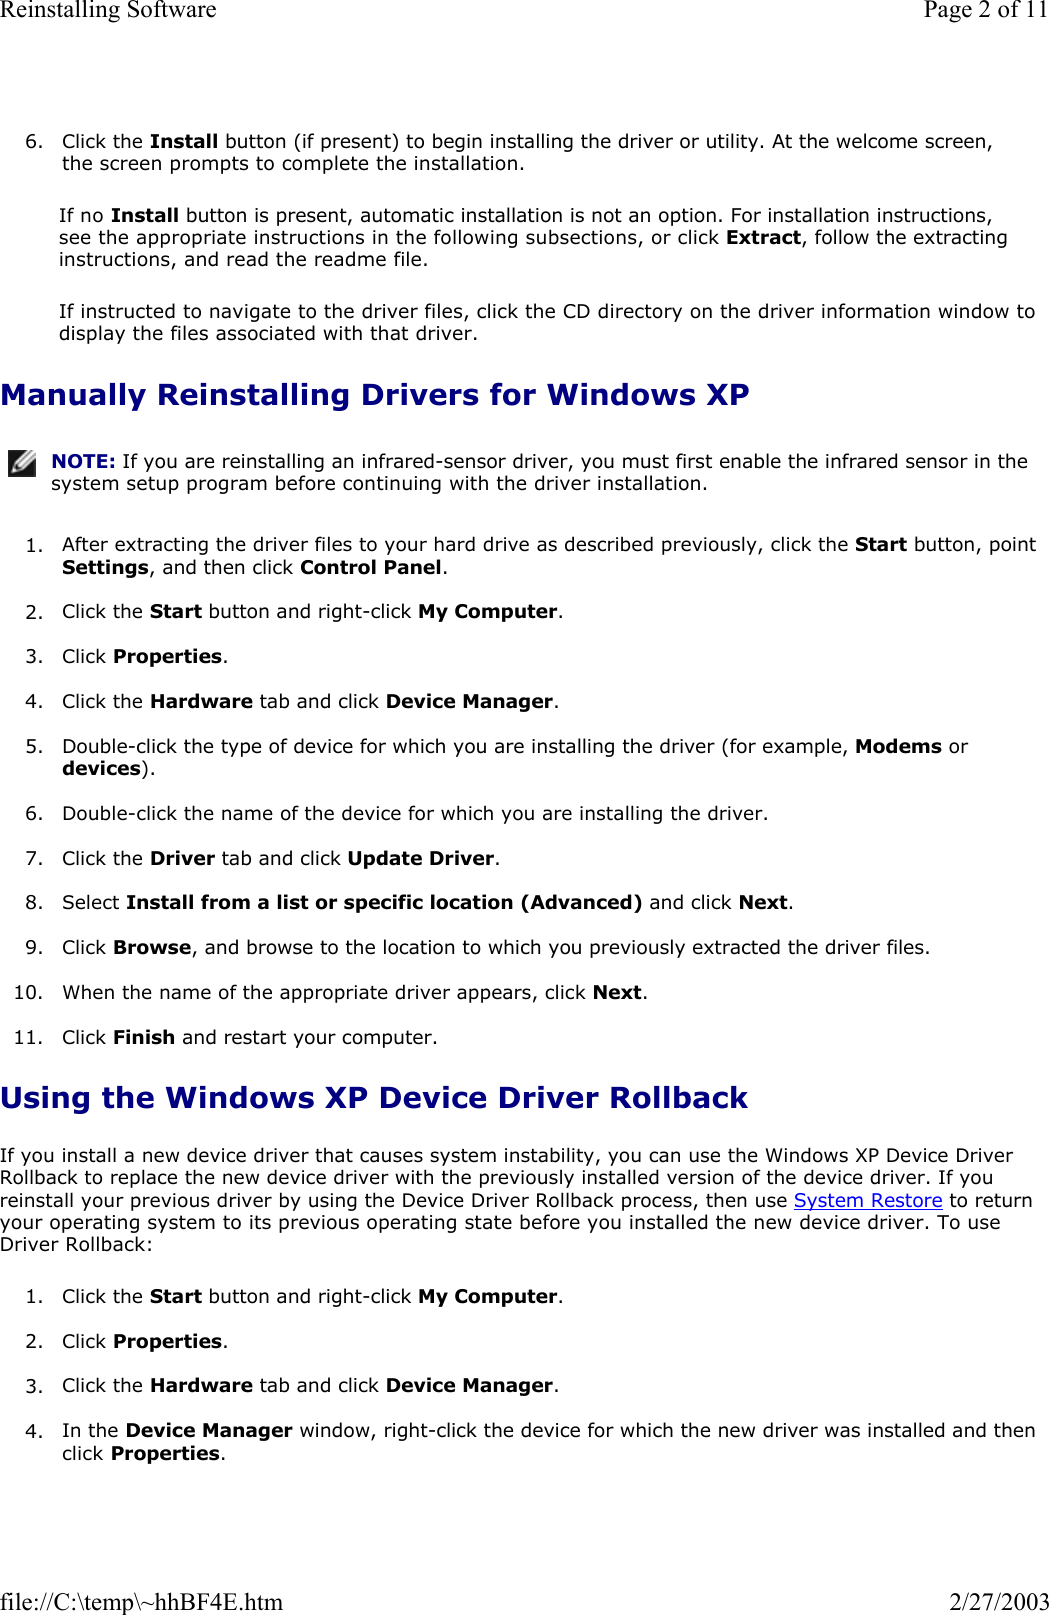  6. Click the Install button (if present) to begin installing the driver or utility. At the welcome screen, the screen prompts to complete the installation.  If no Install button is present, automatic installation is not an option. For installation instructions, see the appropriate instructions in the following subsections, or click Extract, follow the extracting instructions, and read the readme file. If instructed to navigate to the driver files, click the CD directory on the driver information window to display the files associated with that driver. Manually Reinstalling Drivers for Windows XP  1. After extracting the driver files to your hard drive as described previously, click the Start button, point Settings, and then click Control Panel.  2. Click the Start button and right-click My Computer.  3. Click Properties.  4. Click the Hardware tab and click Device Manager.  5. Double-click the type of device for which you are installing the driver (for example, Modems or devices).  6. Double-click the name of the device for which you are installing the driver.  7. Click the Driver tab and click Update Driver.  8. Select Install from a list or specific location (Advanced) and click Next.  9. Click Browse, and browse to the location to which you previously extracted the driver files.  10. When the name of the appropriate driver appears, click Next.   11. Click Finish and restart your computer.  Using the Windows XP Device Driver Rollback If you install a new device driver that causes system instability, you can use the Windows XP Device Driver Rollback to replace the new device driver with the previously installed version of the device driver. If you reinstall your previous driver by using the Device Driver Rollback process, then use System Restore to return your operating system to its previous operating state before you installed the new device driver. To use Driver Rollback: 1. Click the Start button and right-click My Computer.  2. Click Properties.  3. Click the Hardware tab and click Device Manager.  4. In the Device Manager window, right-click the device for which the new driver was installed and then click Properties.  NOTE: If you are reinstalling an infrared-sensor driver, you must first enable the infrared sensor in the system setup program before continuing with the driver installation.Page 2 of 11Reinstalling Software2/27/2003file://C:\temp\~hhBF4E.htm